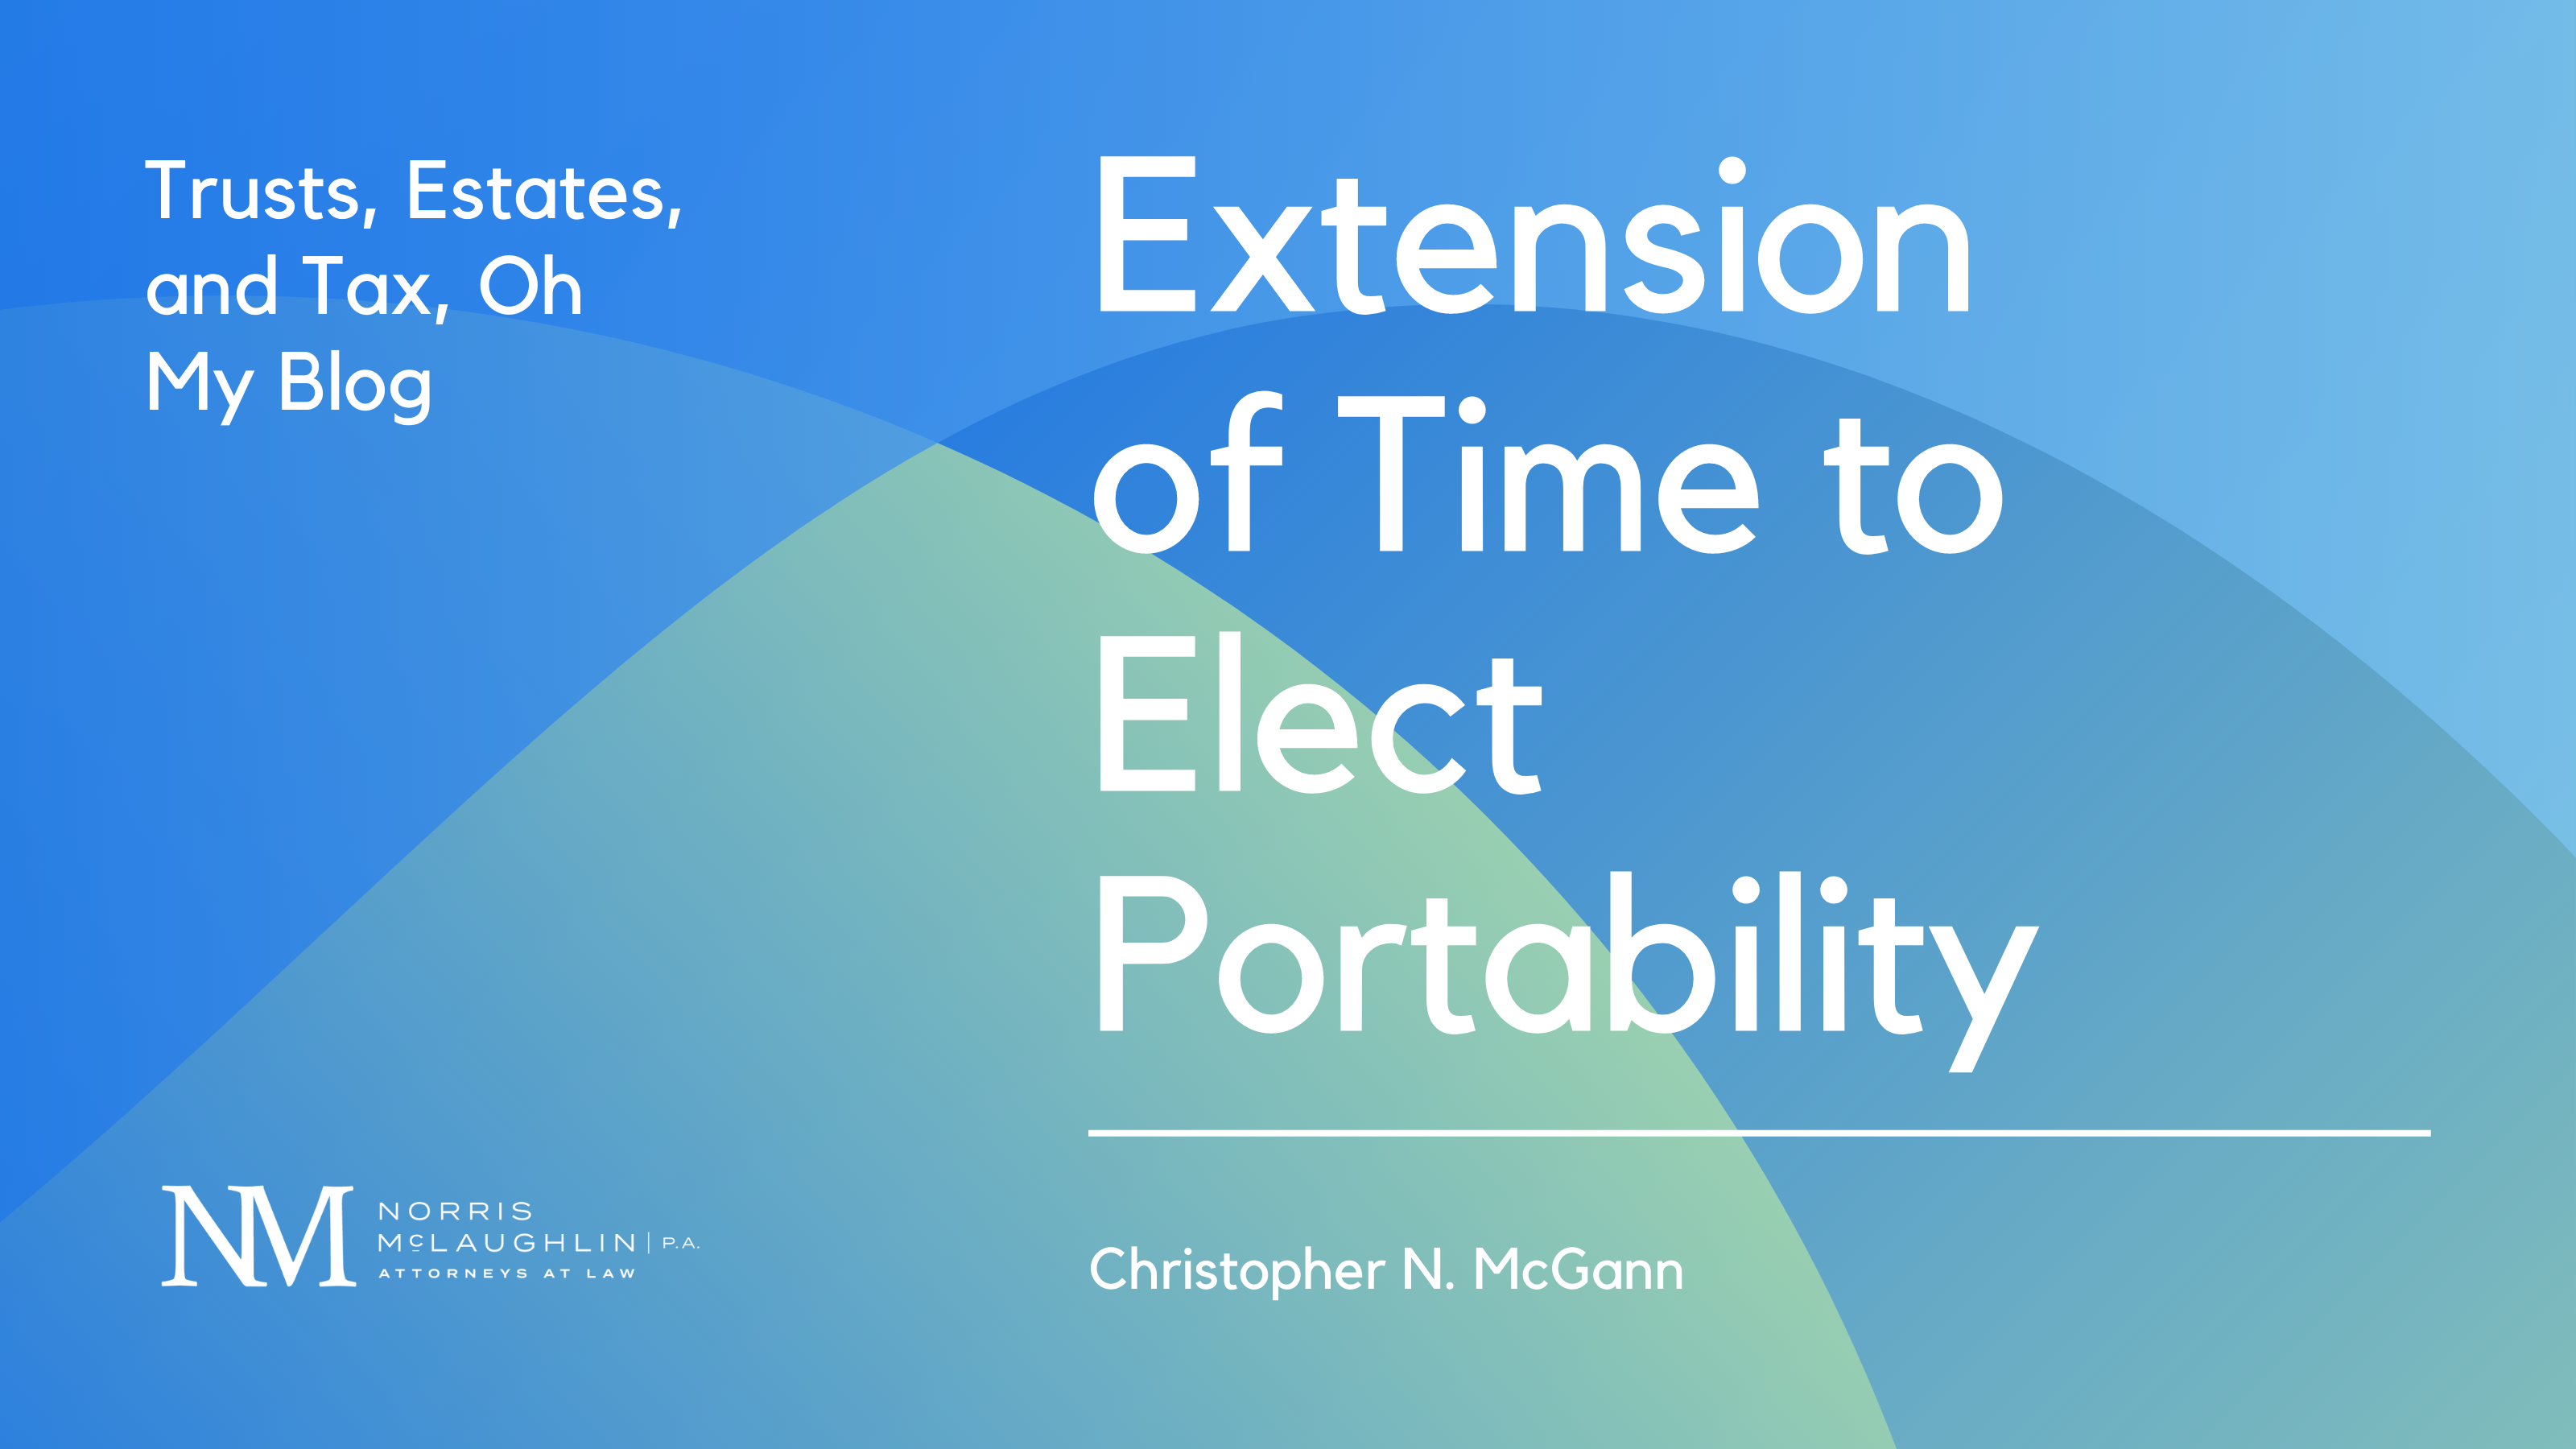 Extension of Time to Elect Portability